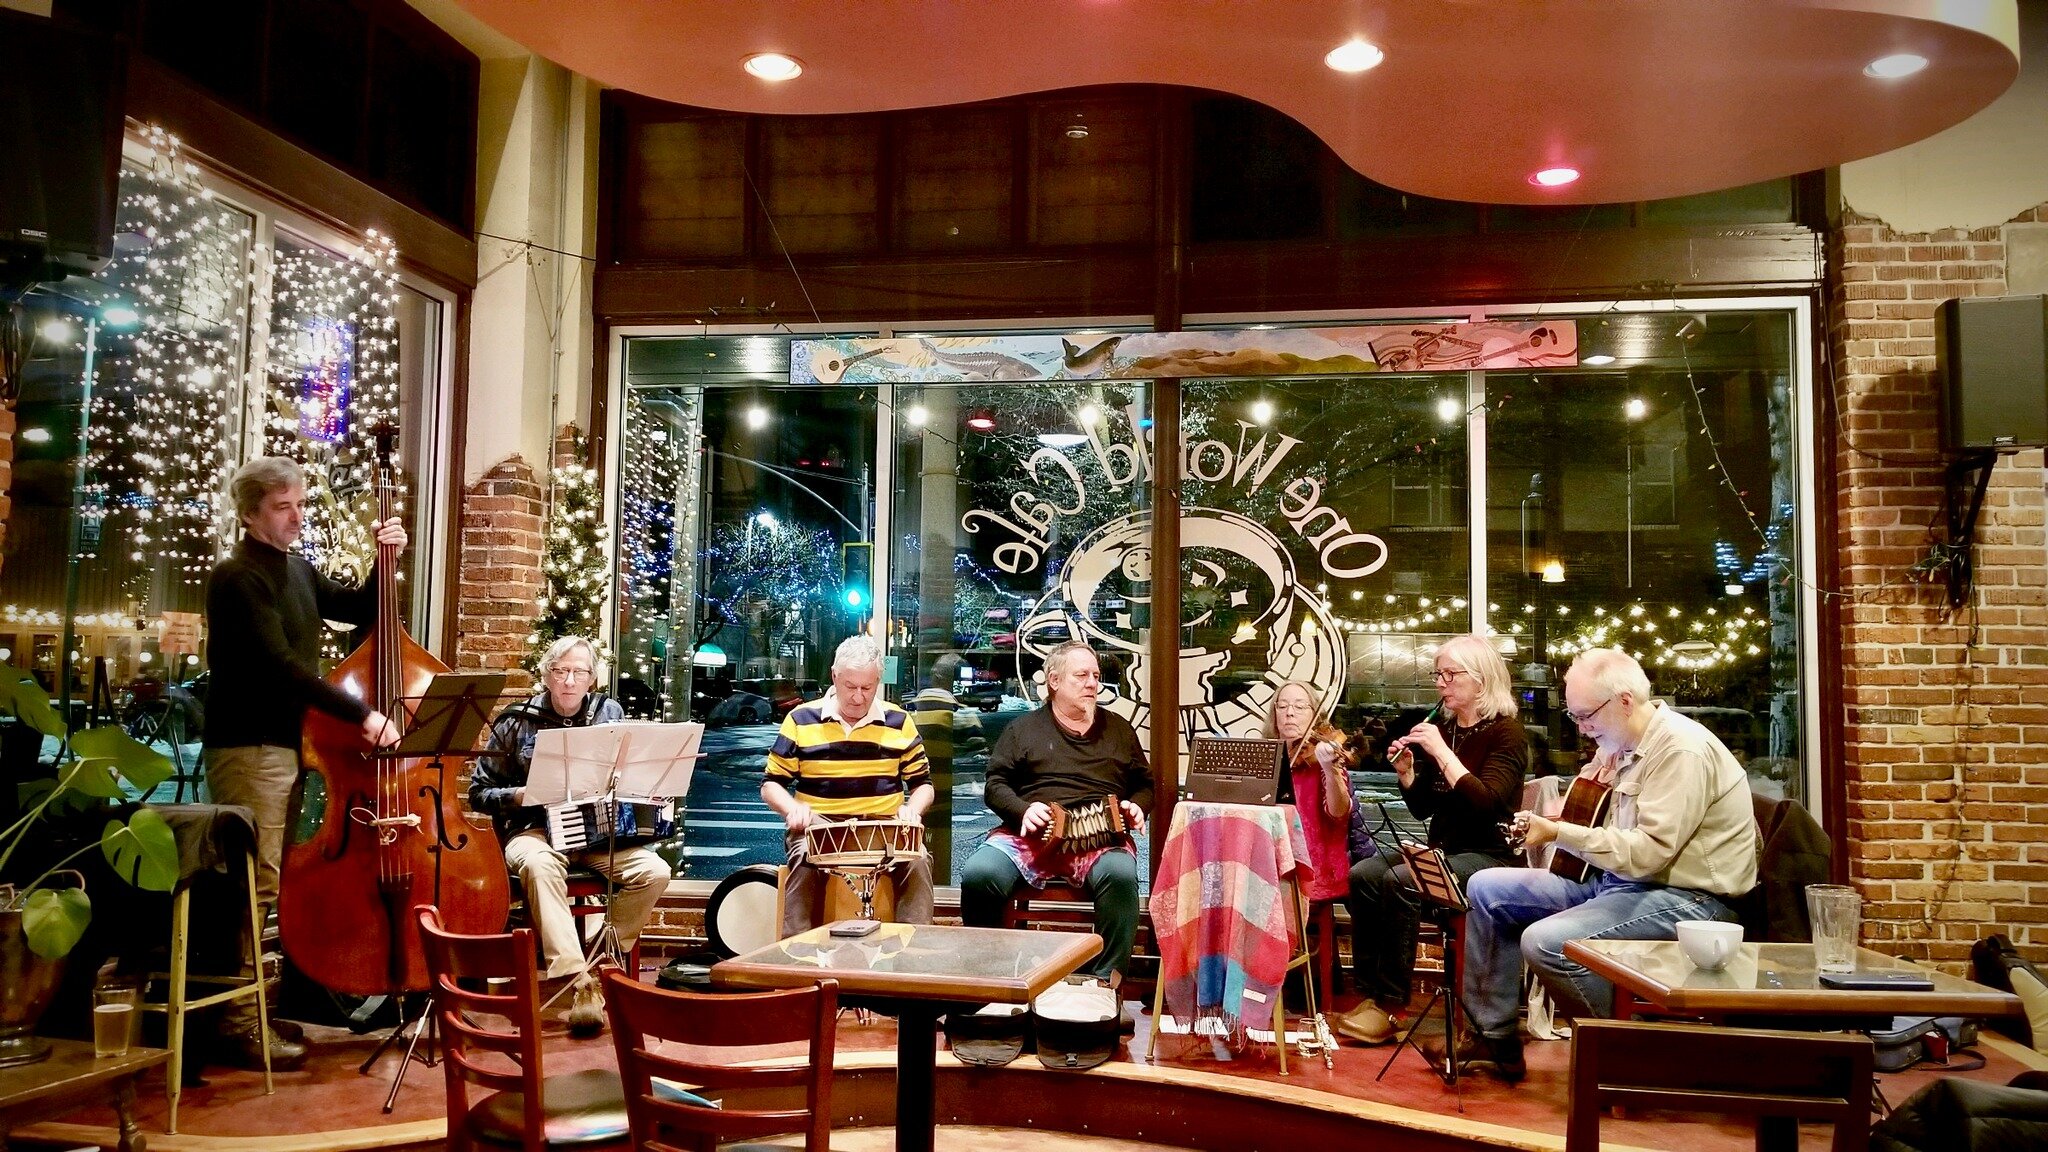 Tomorrow March 23 6:00 pm Frogtown plays a lively mix of jigs, reels, polkas, marches, and waltzes from across the globe!  https://www.facebook.com/frogtownband  #livemusic